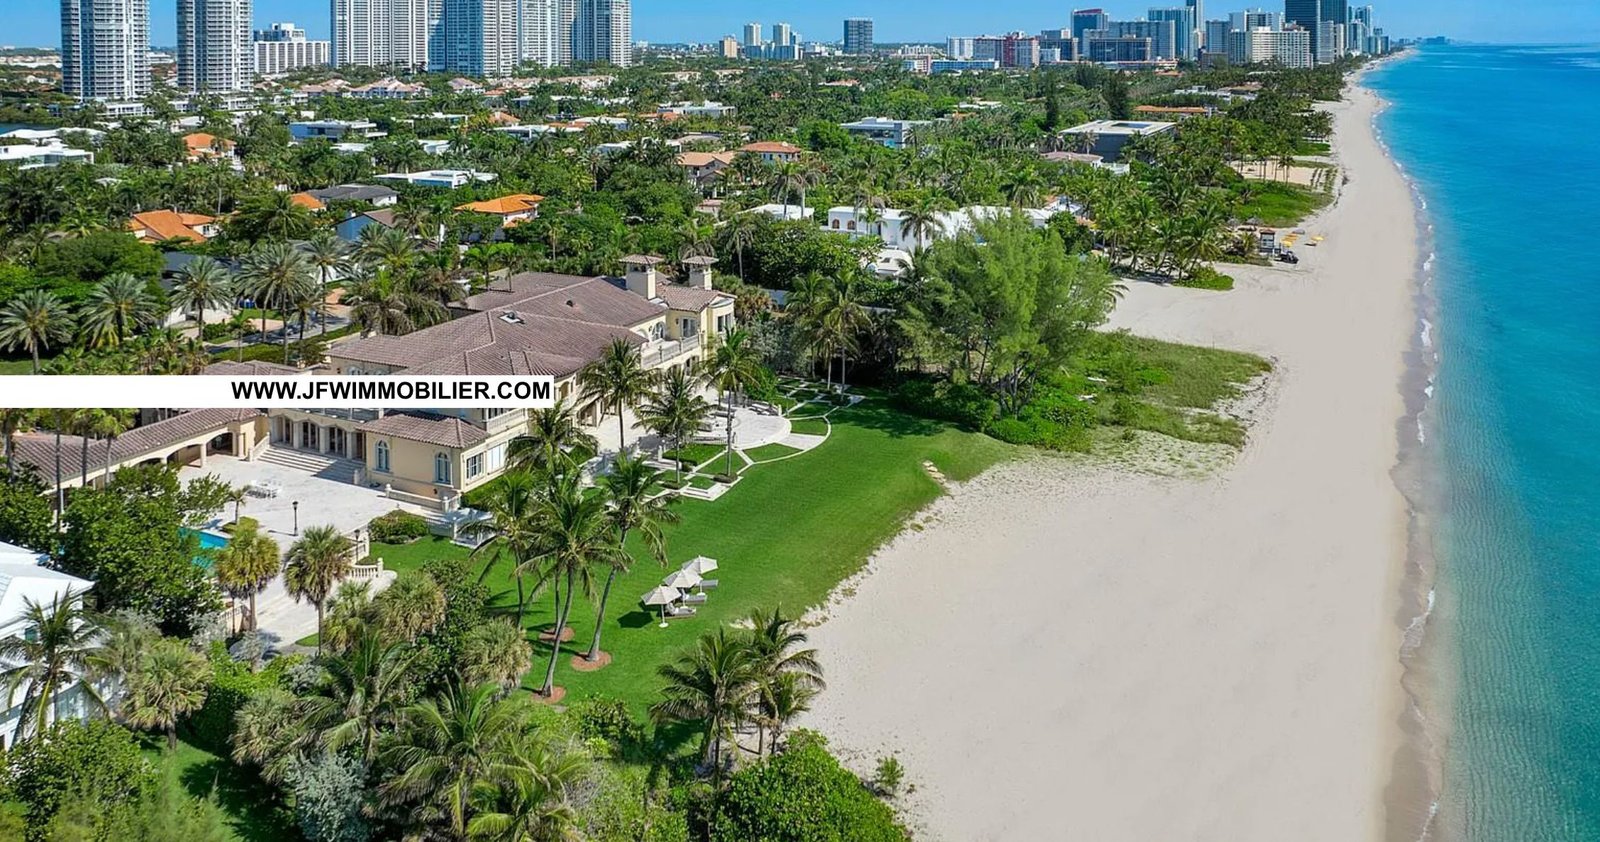 Oceanfront mansion between Miami and Fort Lauderdale. Florida luxury real estate. Prestige.